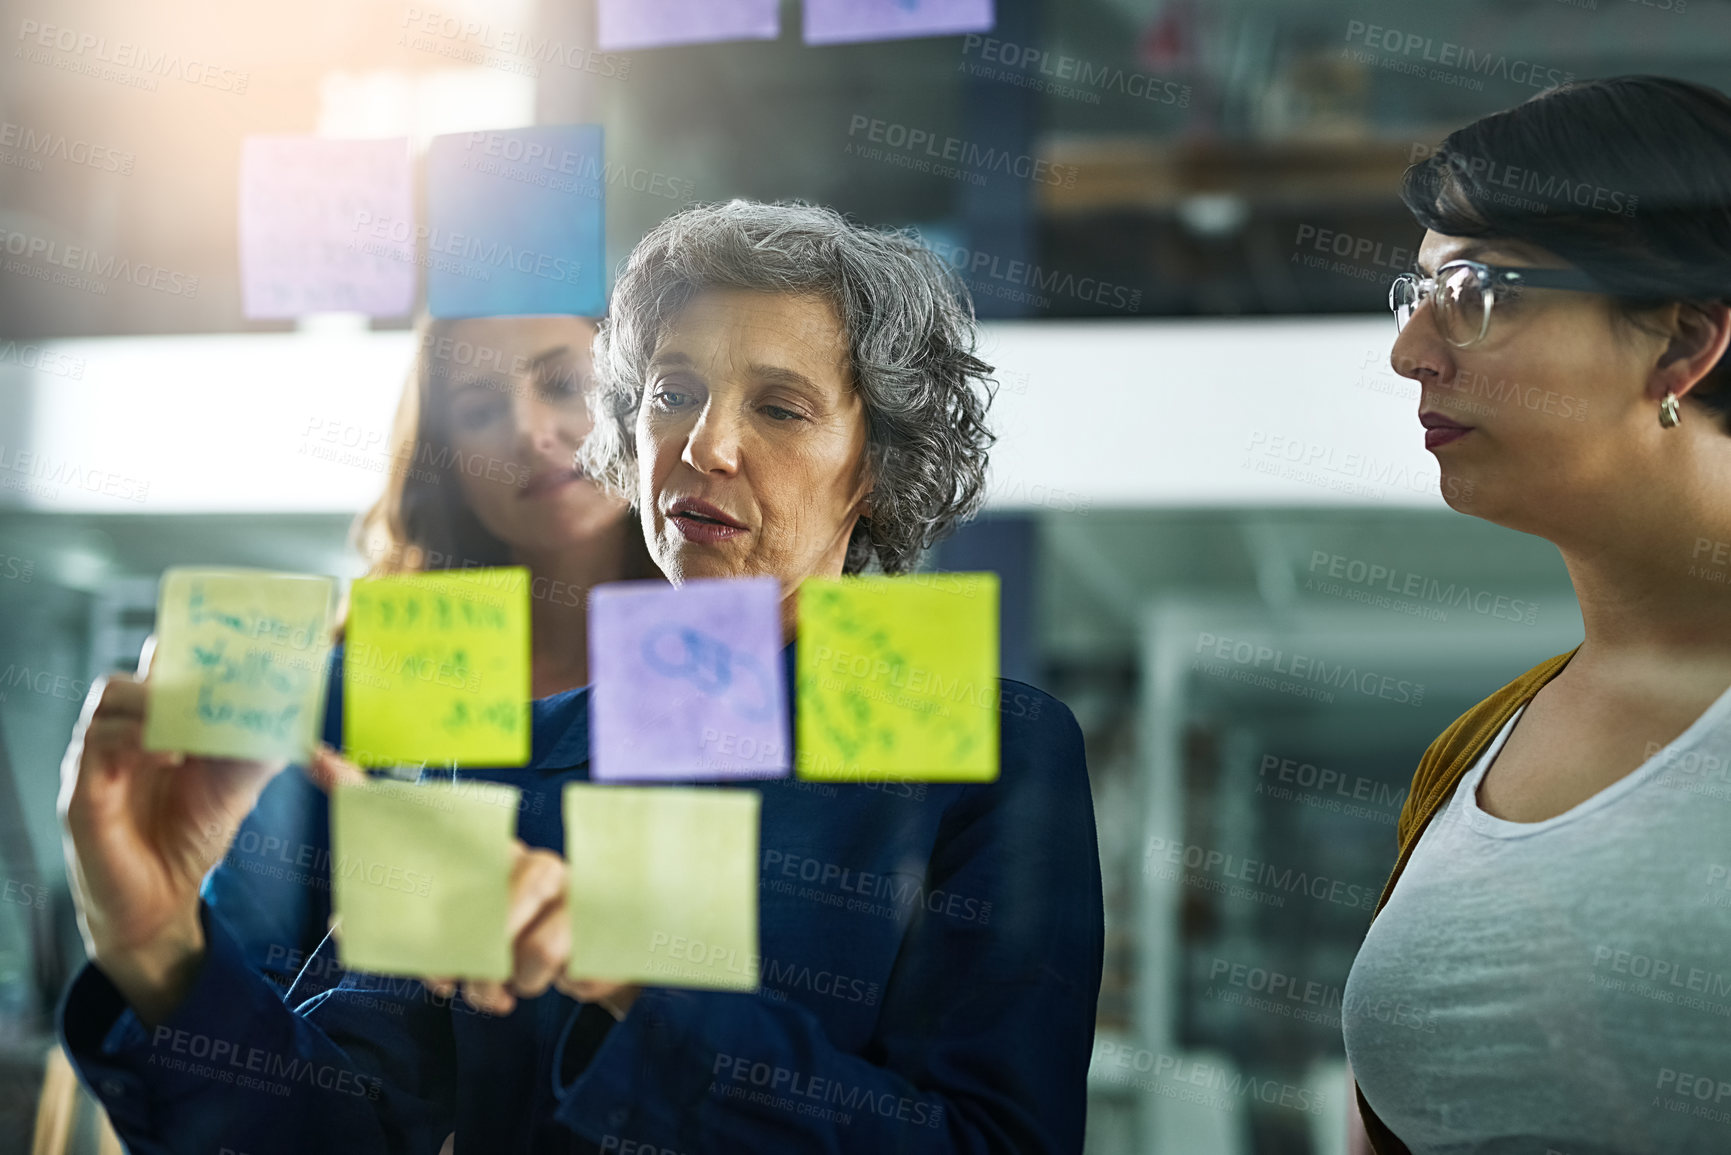 Buy stock photo Shot of a group of colleagues working with adhesive notes on a glass wall in the office